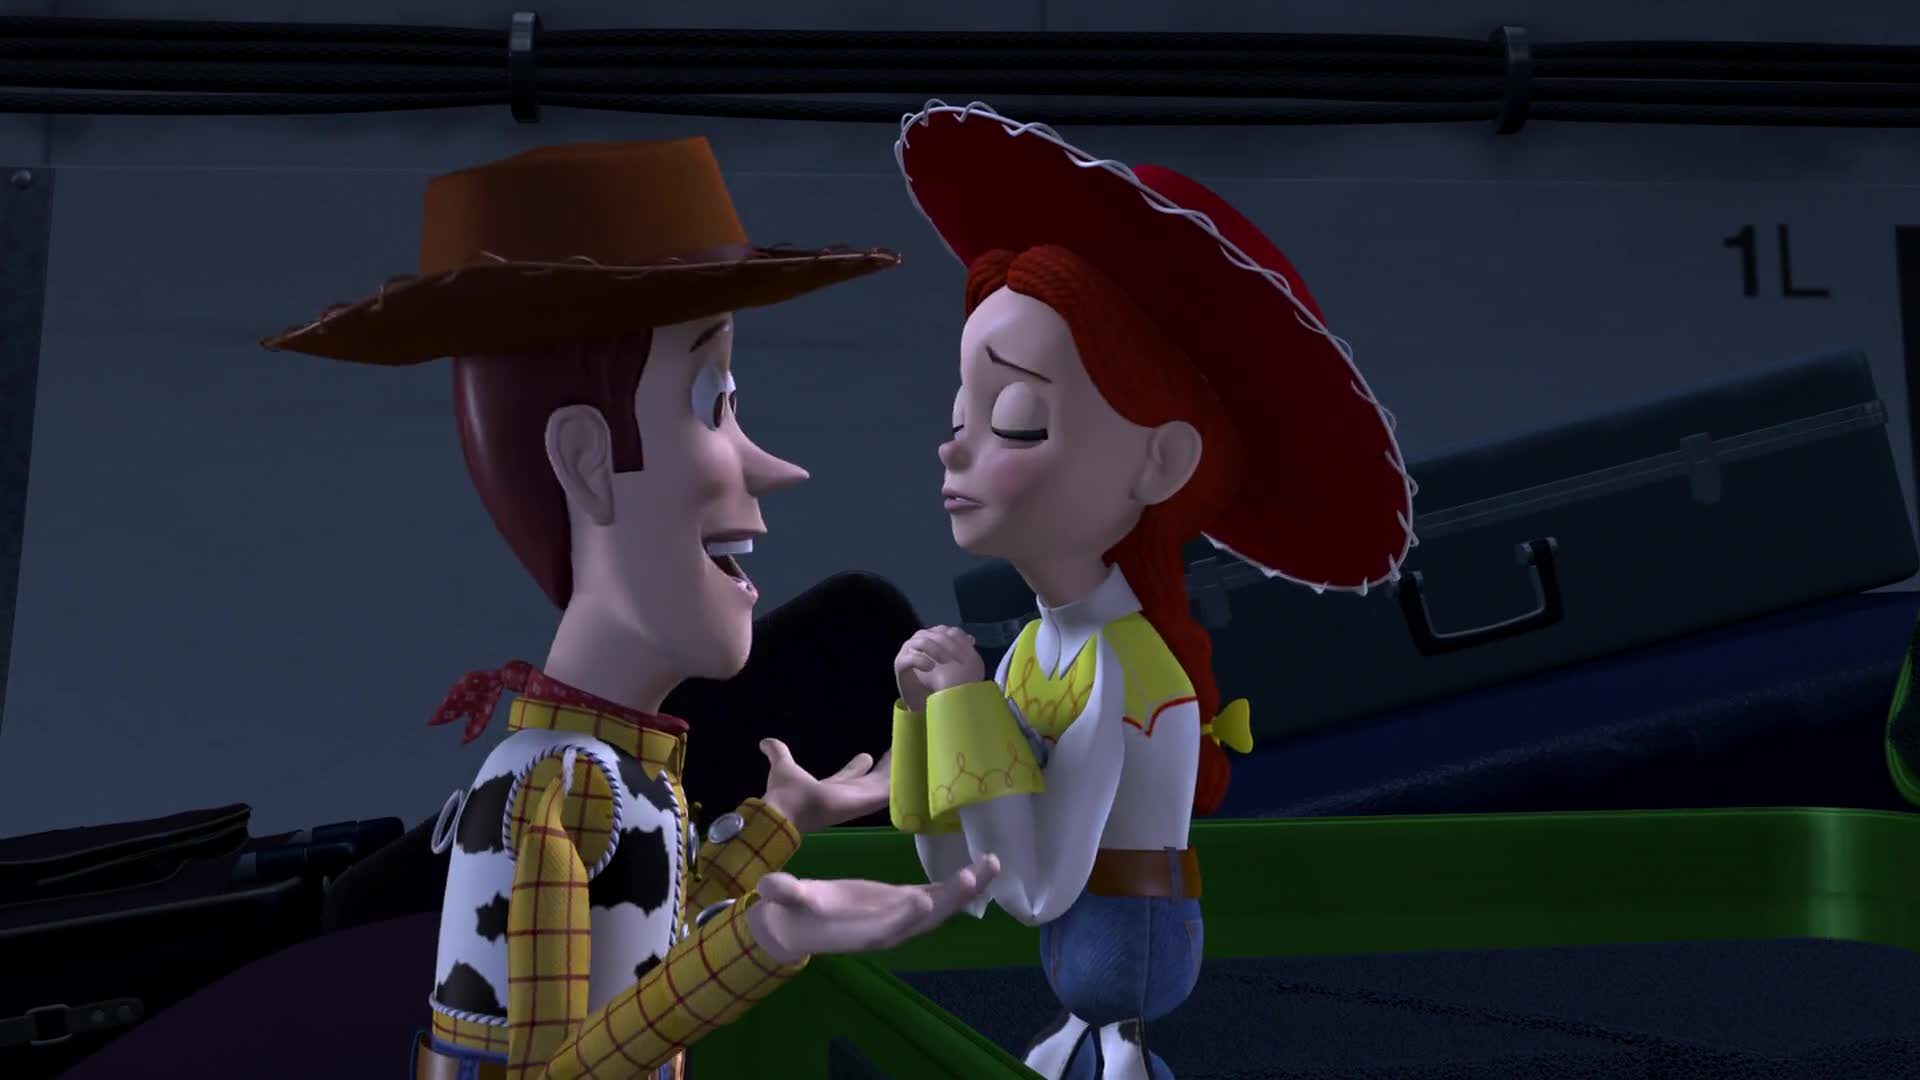 Funny quotations from toy story 3. 